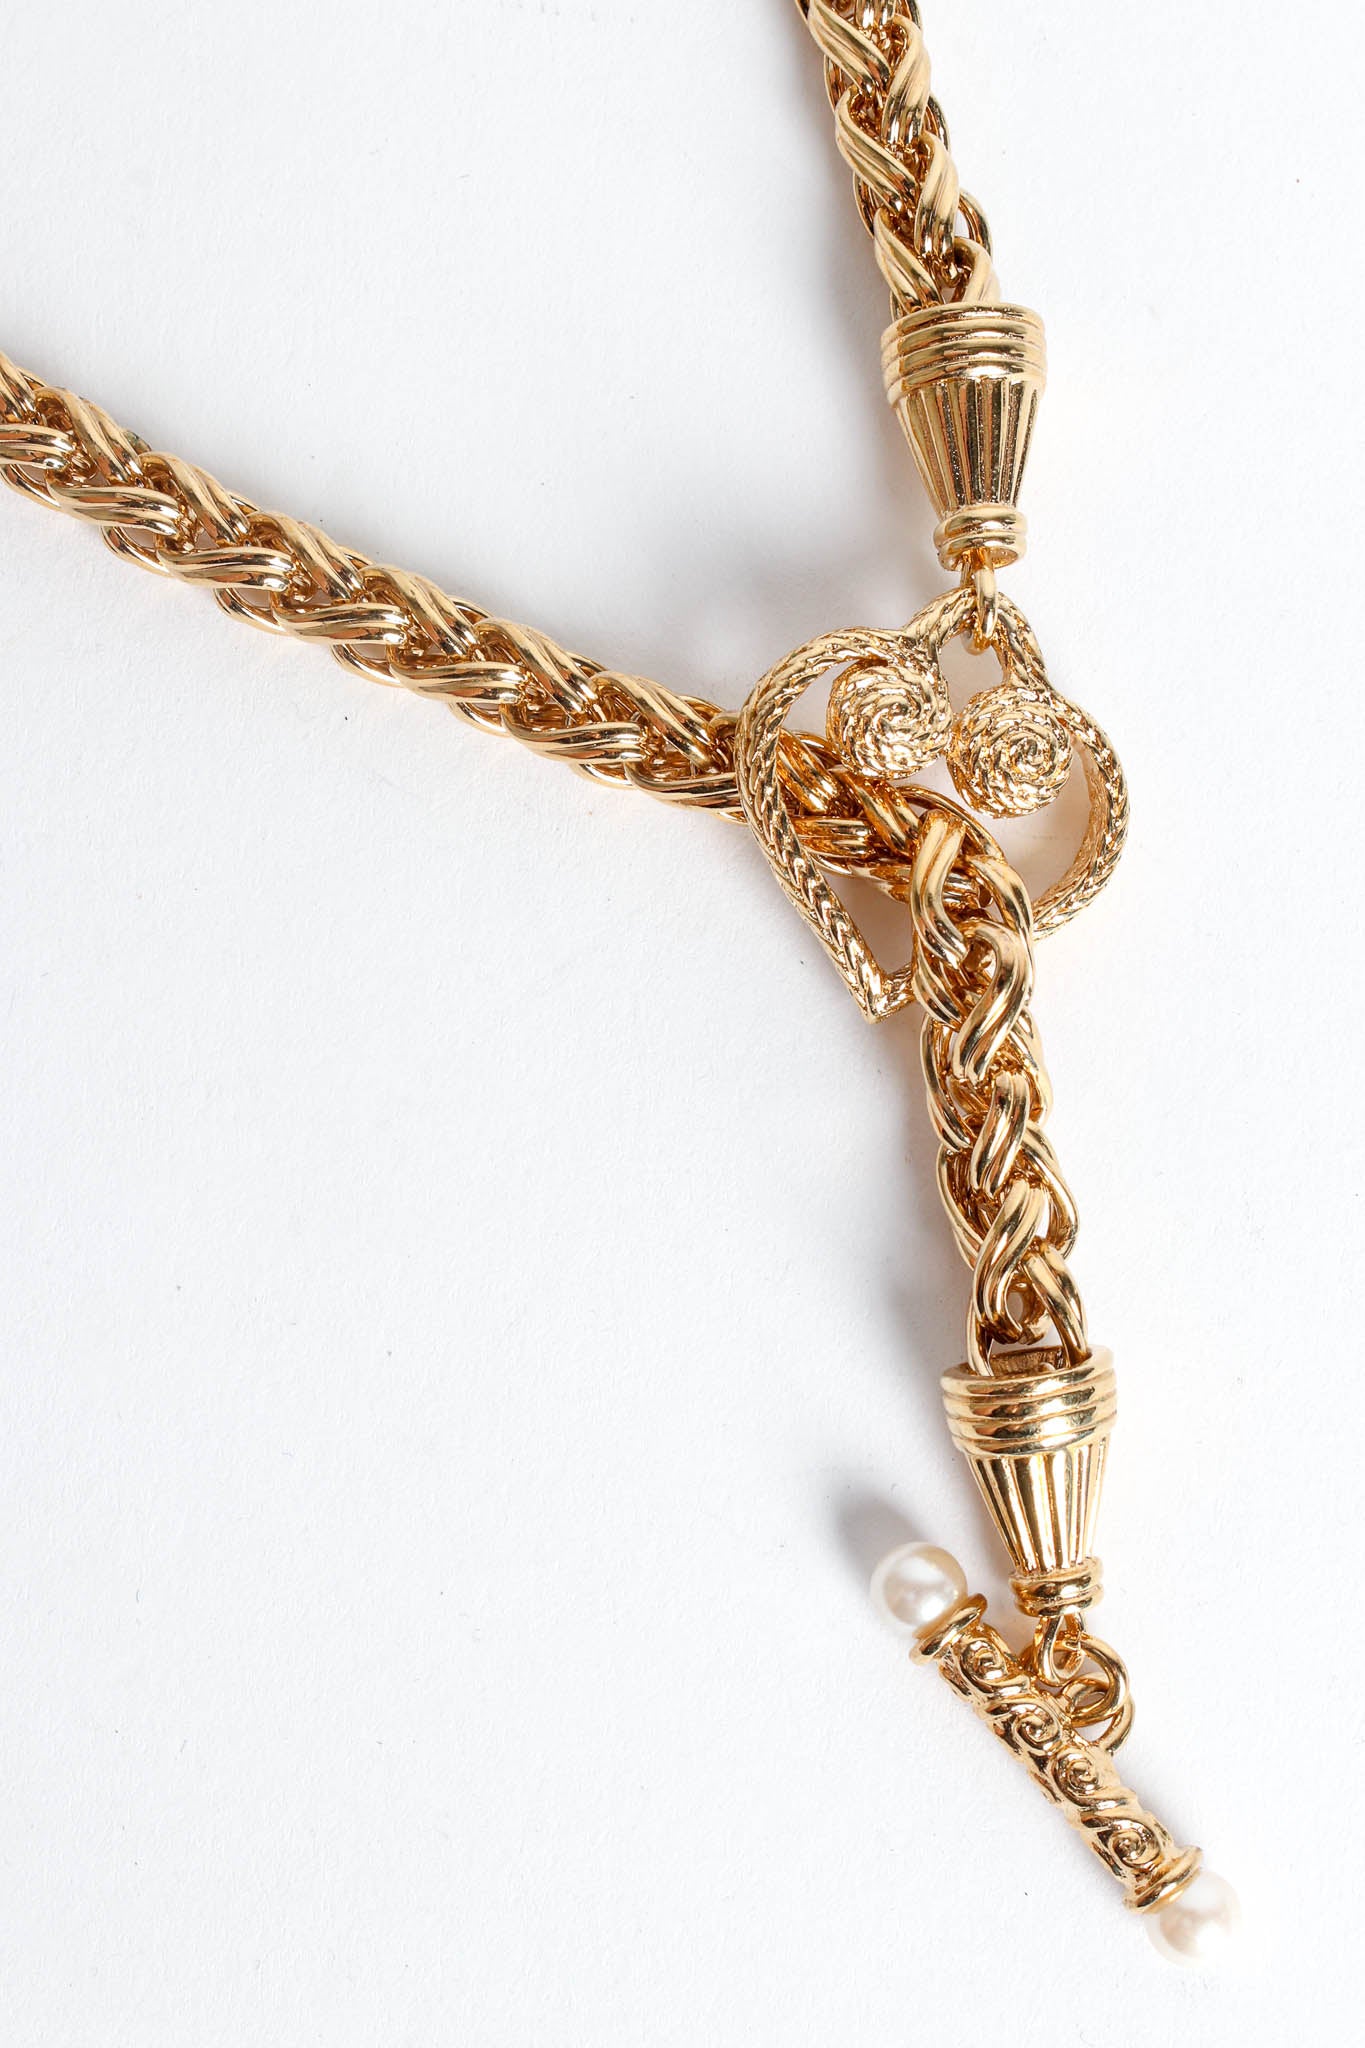 Vintage Givenchy Love Pearl Choker Necklace pendant/rod detail @ Recess Los Angeles 